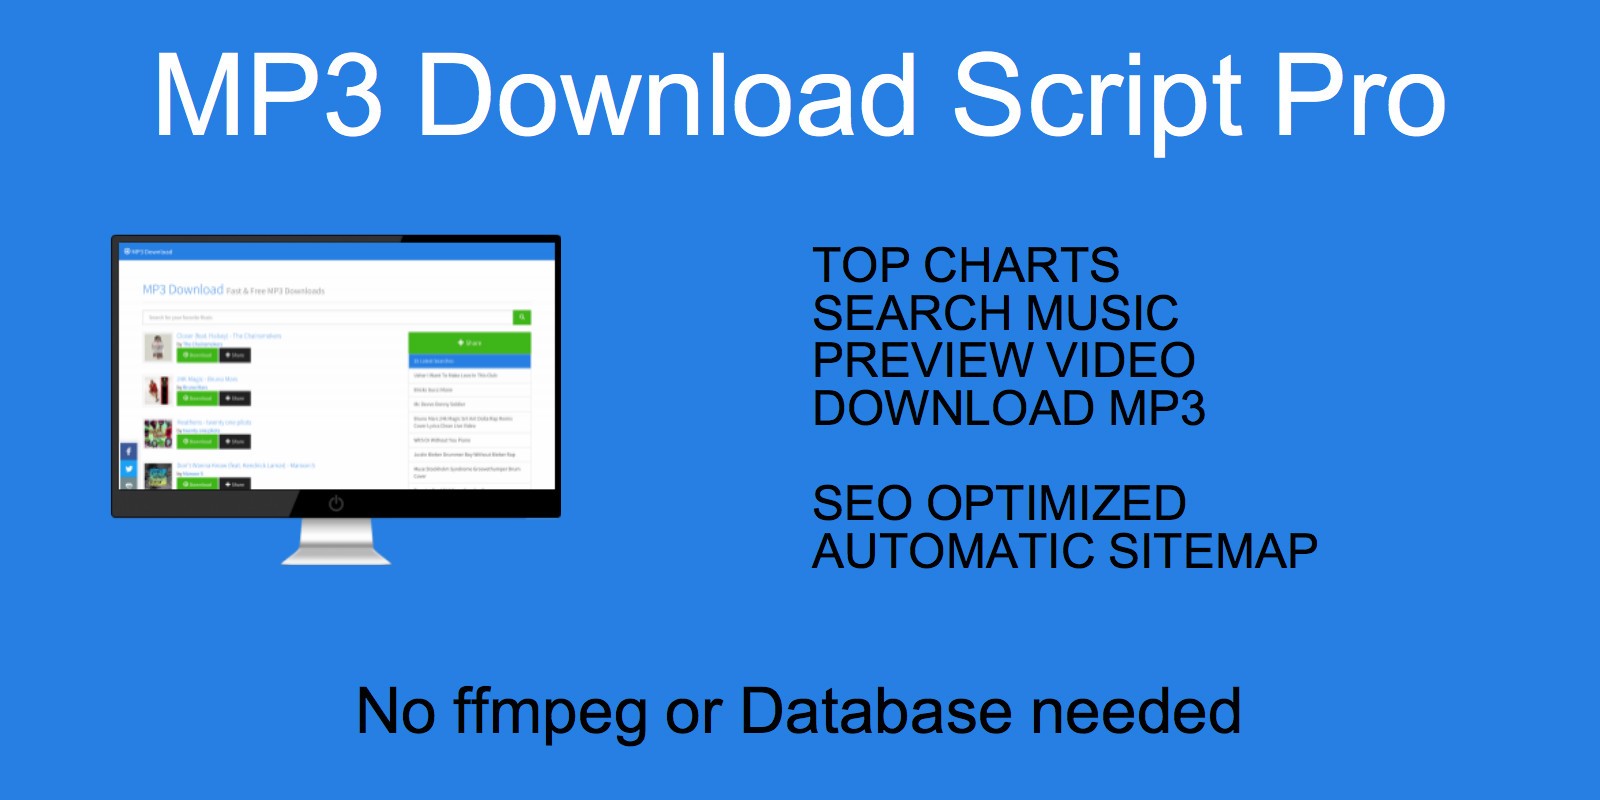 Php скрипт. Search engine php script. Поиск МП. Mp3-Converter-php-script 13409593 nulled. Scripting pro